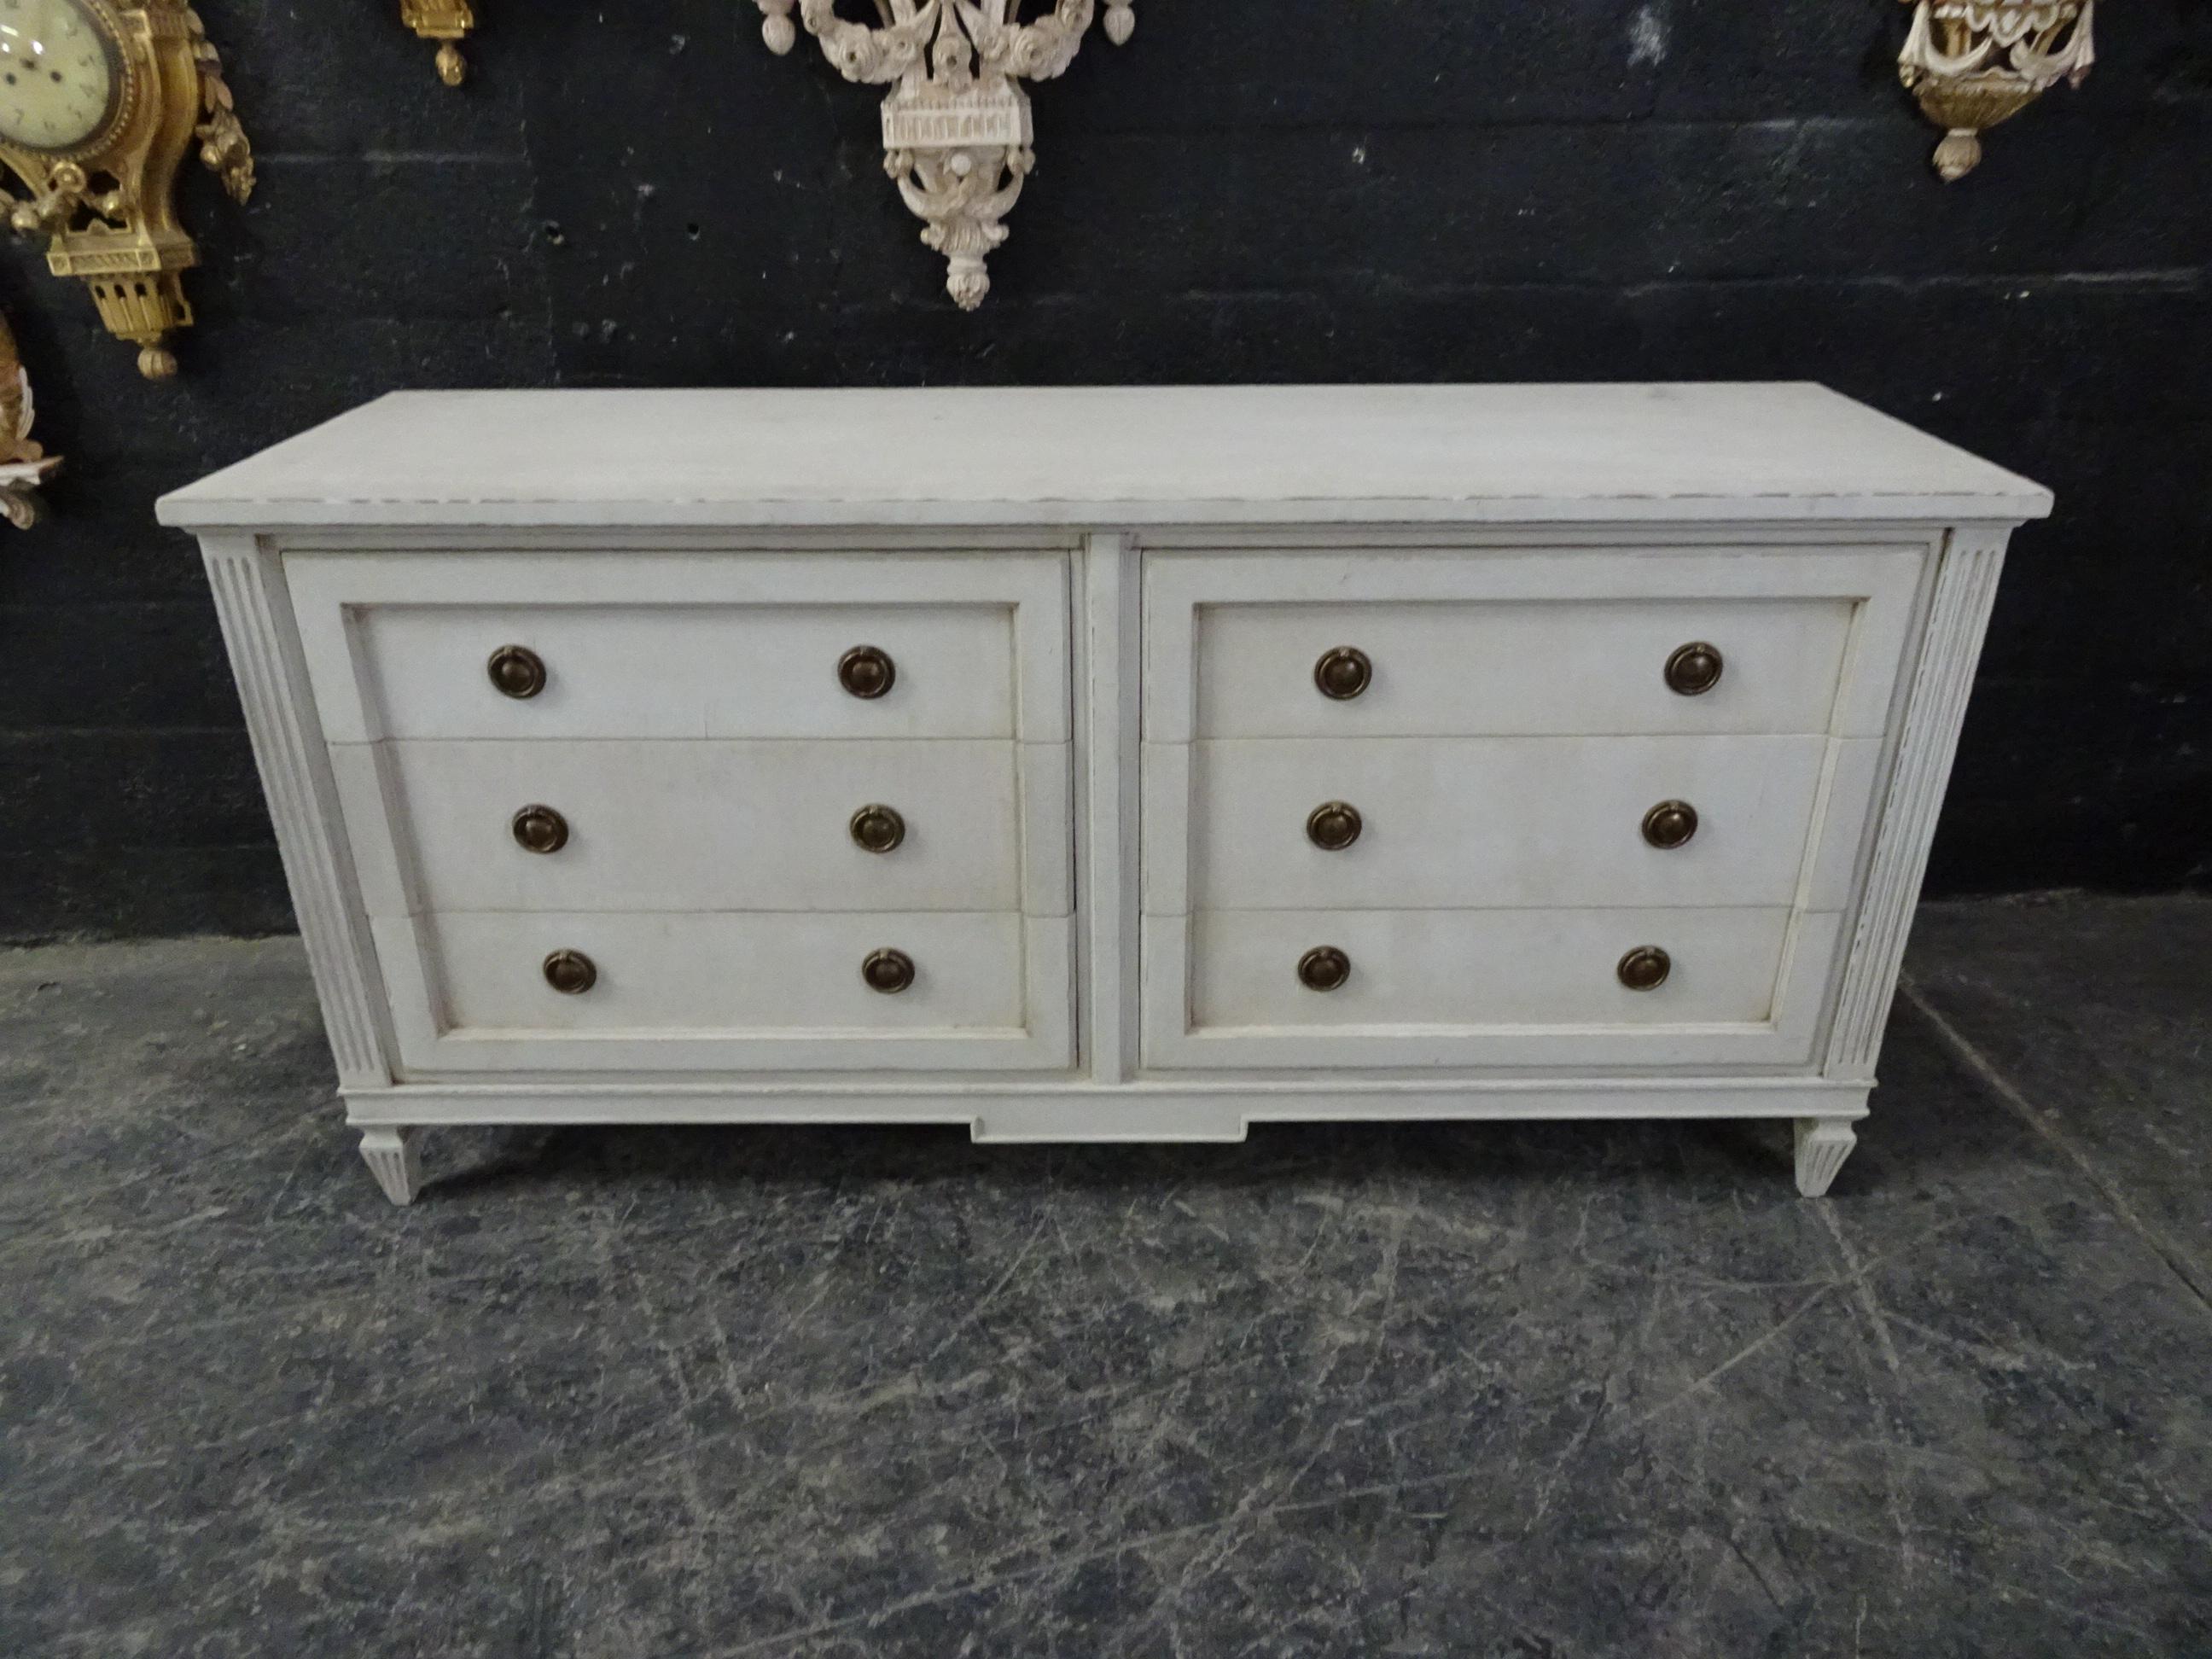 This is a 6-drawer Gustavian dresser, it’s been restored and repainted with milk paints 